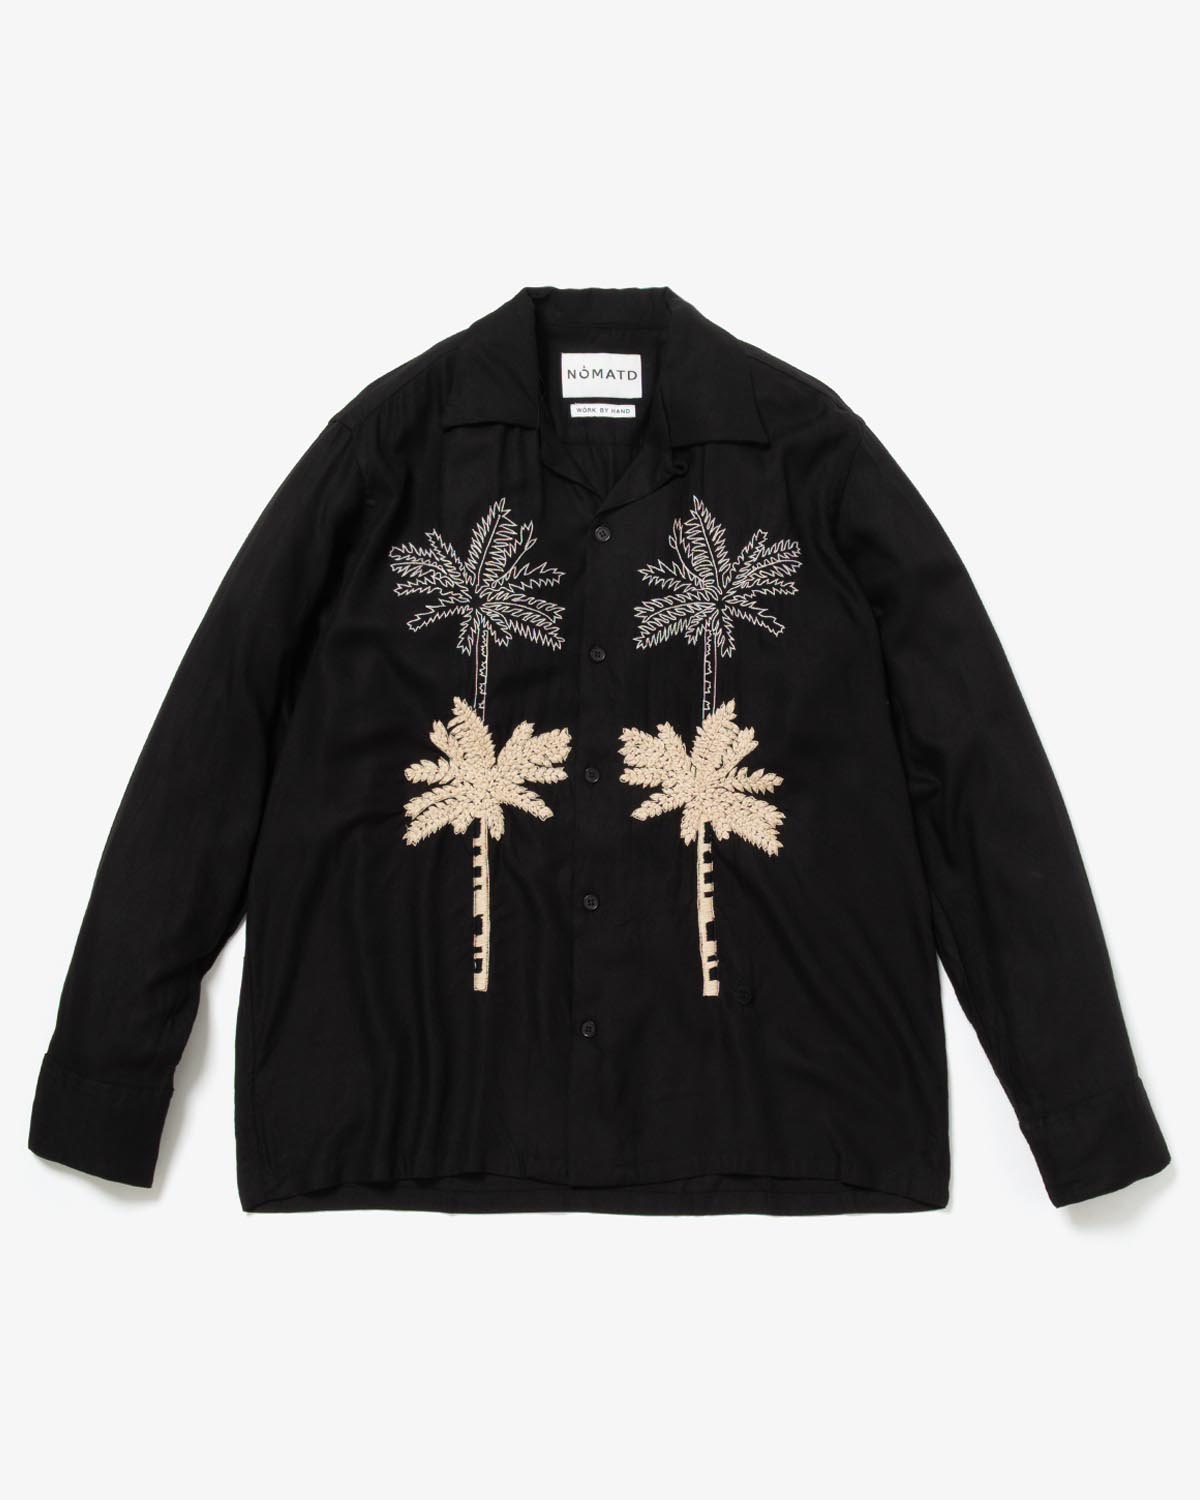 PARM TREE HAND EMBROIDERY LS SHIRT